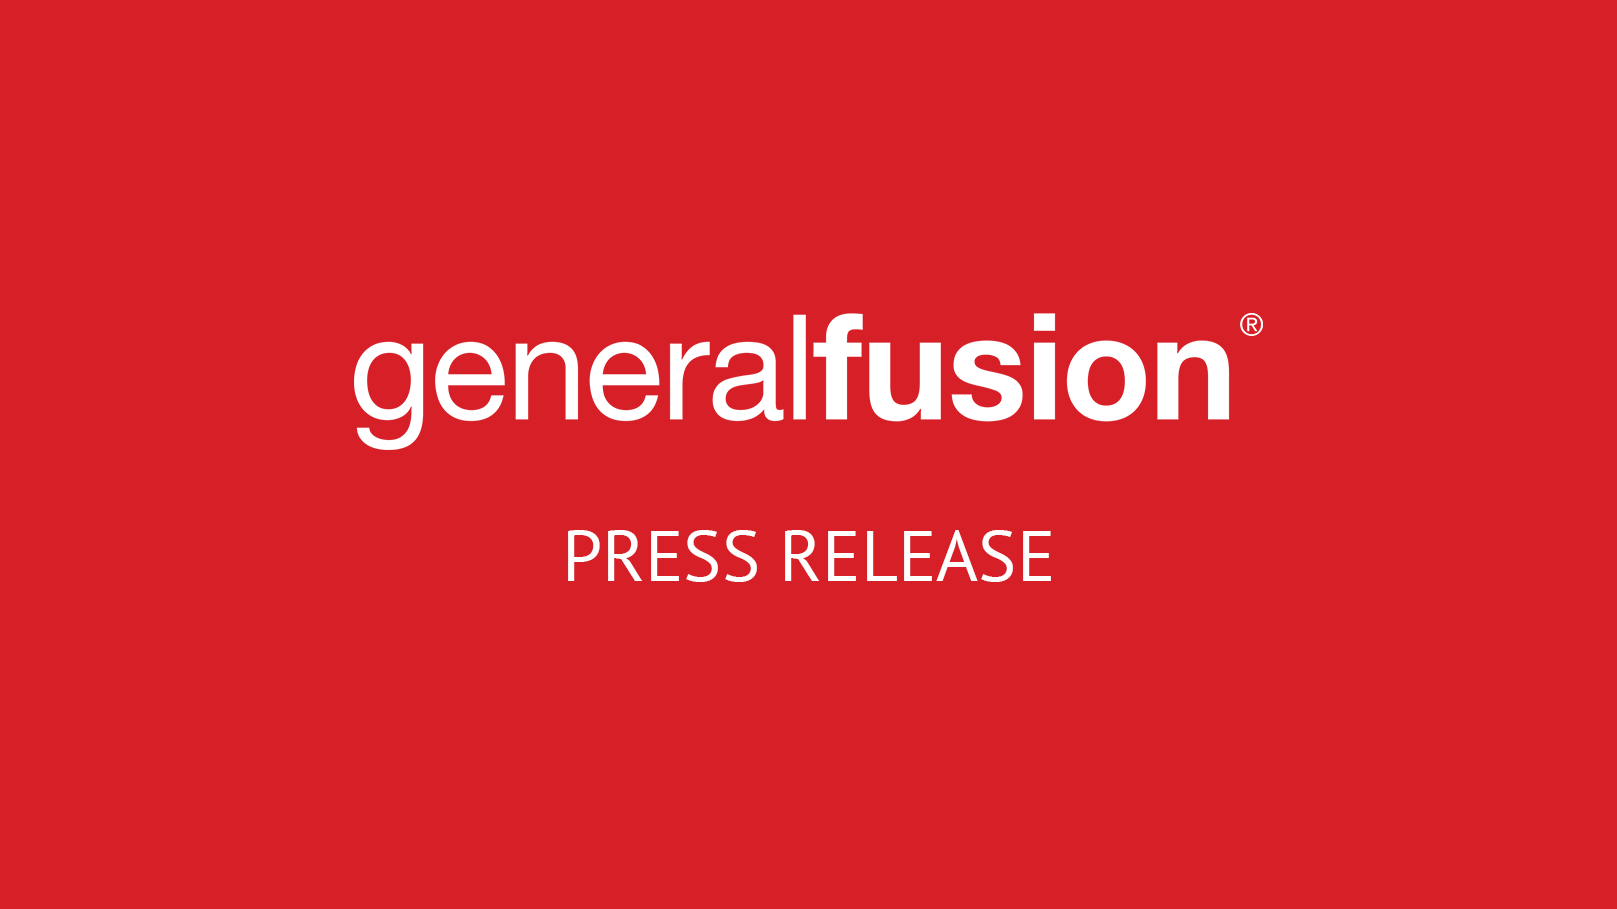 General Fusion opens new headquarters near Vancouver International Airport